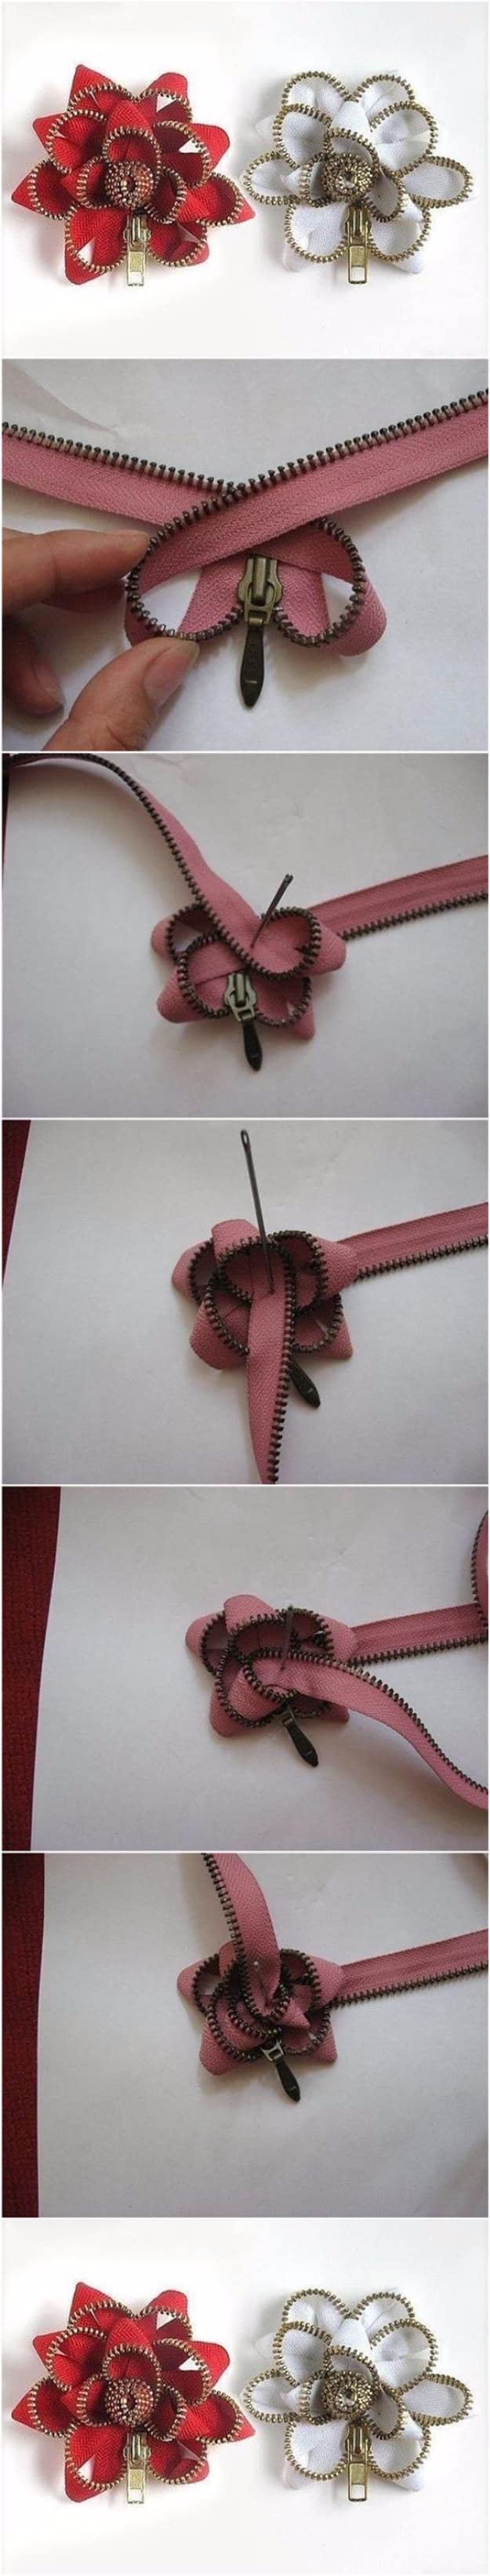 Creative DIY Projects With Zippers - Easy Zipper Flowers - Easy Crafts and Fashion Ideas With A Zipper - Jewelry, Home Decor, School Supplies and DIY Gift Ideas - Quick DIYs for Fun Weekend Projects 